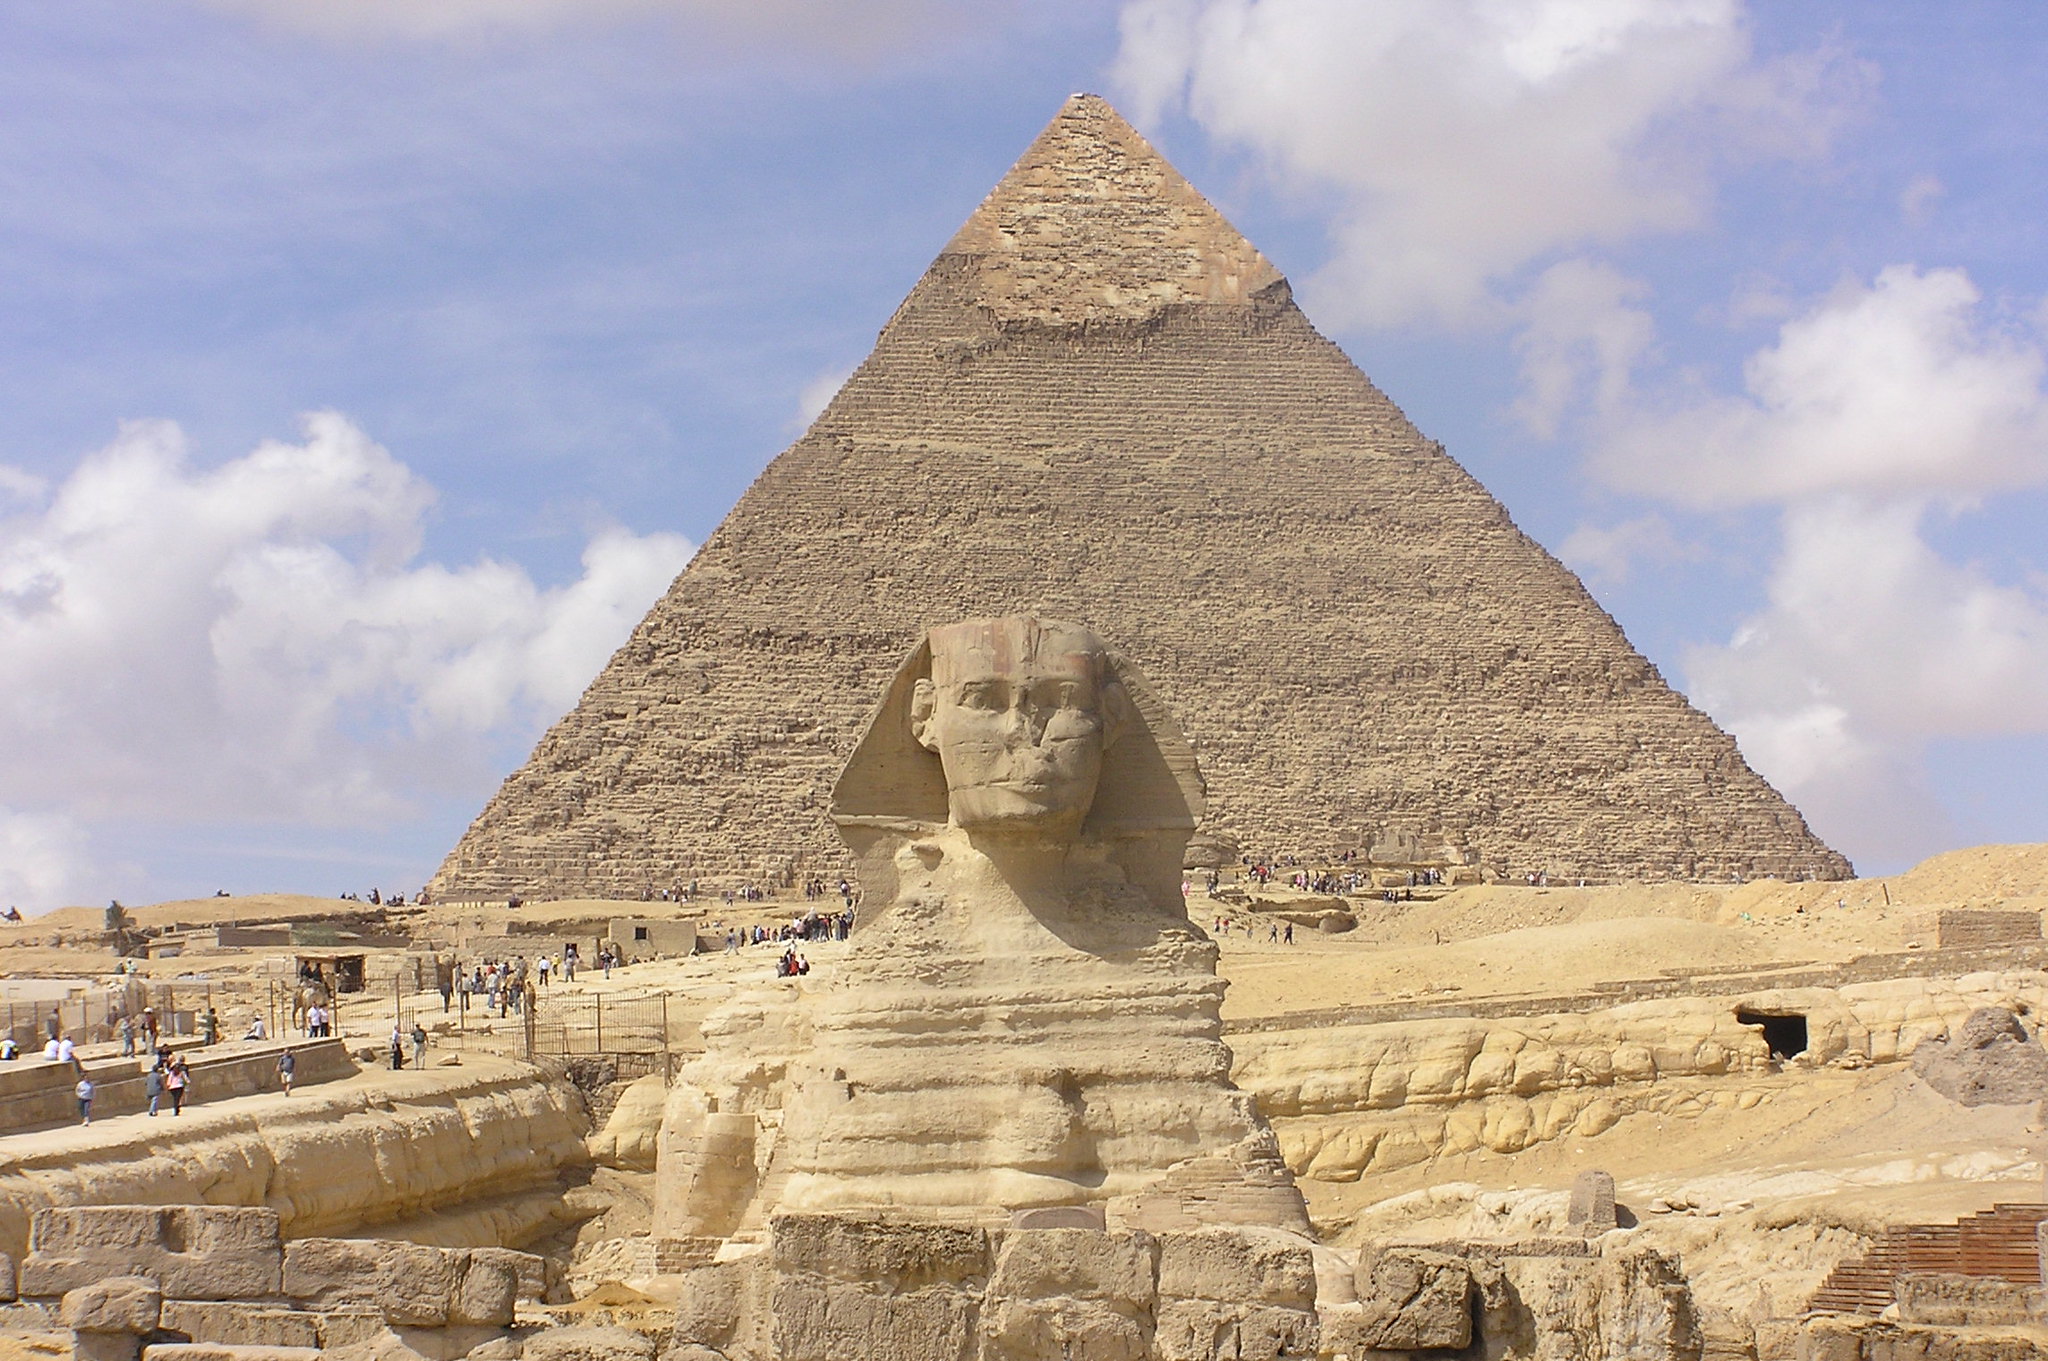 The great sphinx of giza, a magnificent example of human effort to transform earth, with the pyramid of khafre in the background under a clear sky.